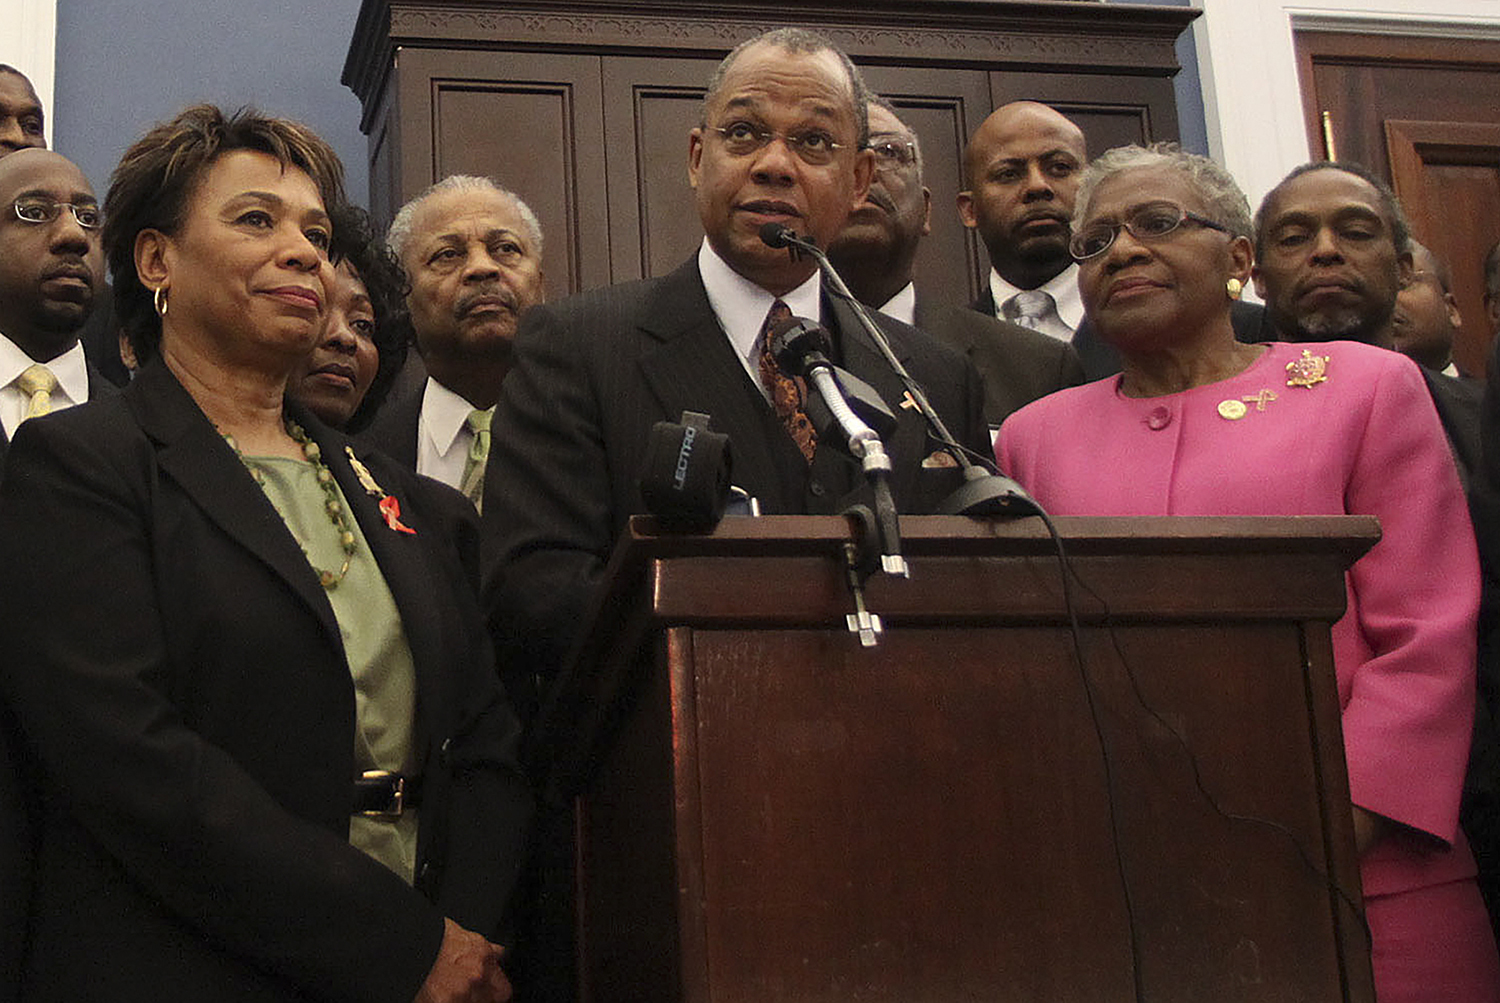 FILE - Rep. Barbara Lee, D-Calif., Rev. Calvin Butts, and Rep. Alcee Hastings, D-Fla., are joined at podium by other church and community leaders from New York, on Capitol Hill in Washington, Wednesday, March 17, 2010. Butts, who welcomed generations of worshippers as well as politicial leaders from across the nation and around the world at Harlem's landmark Abyssinian Baptist Church, died Friday, Oct. 28, 2022 at age 73, the church announced. (AP Photo/Lauren Victoria Burke, File)